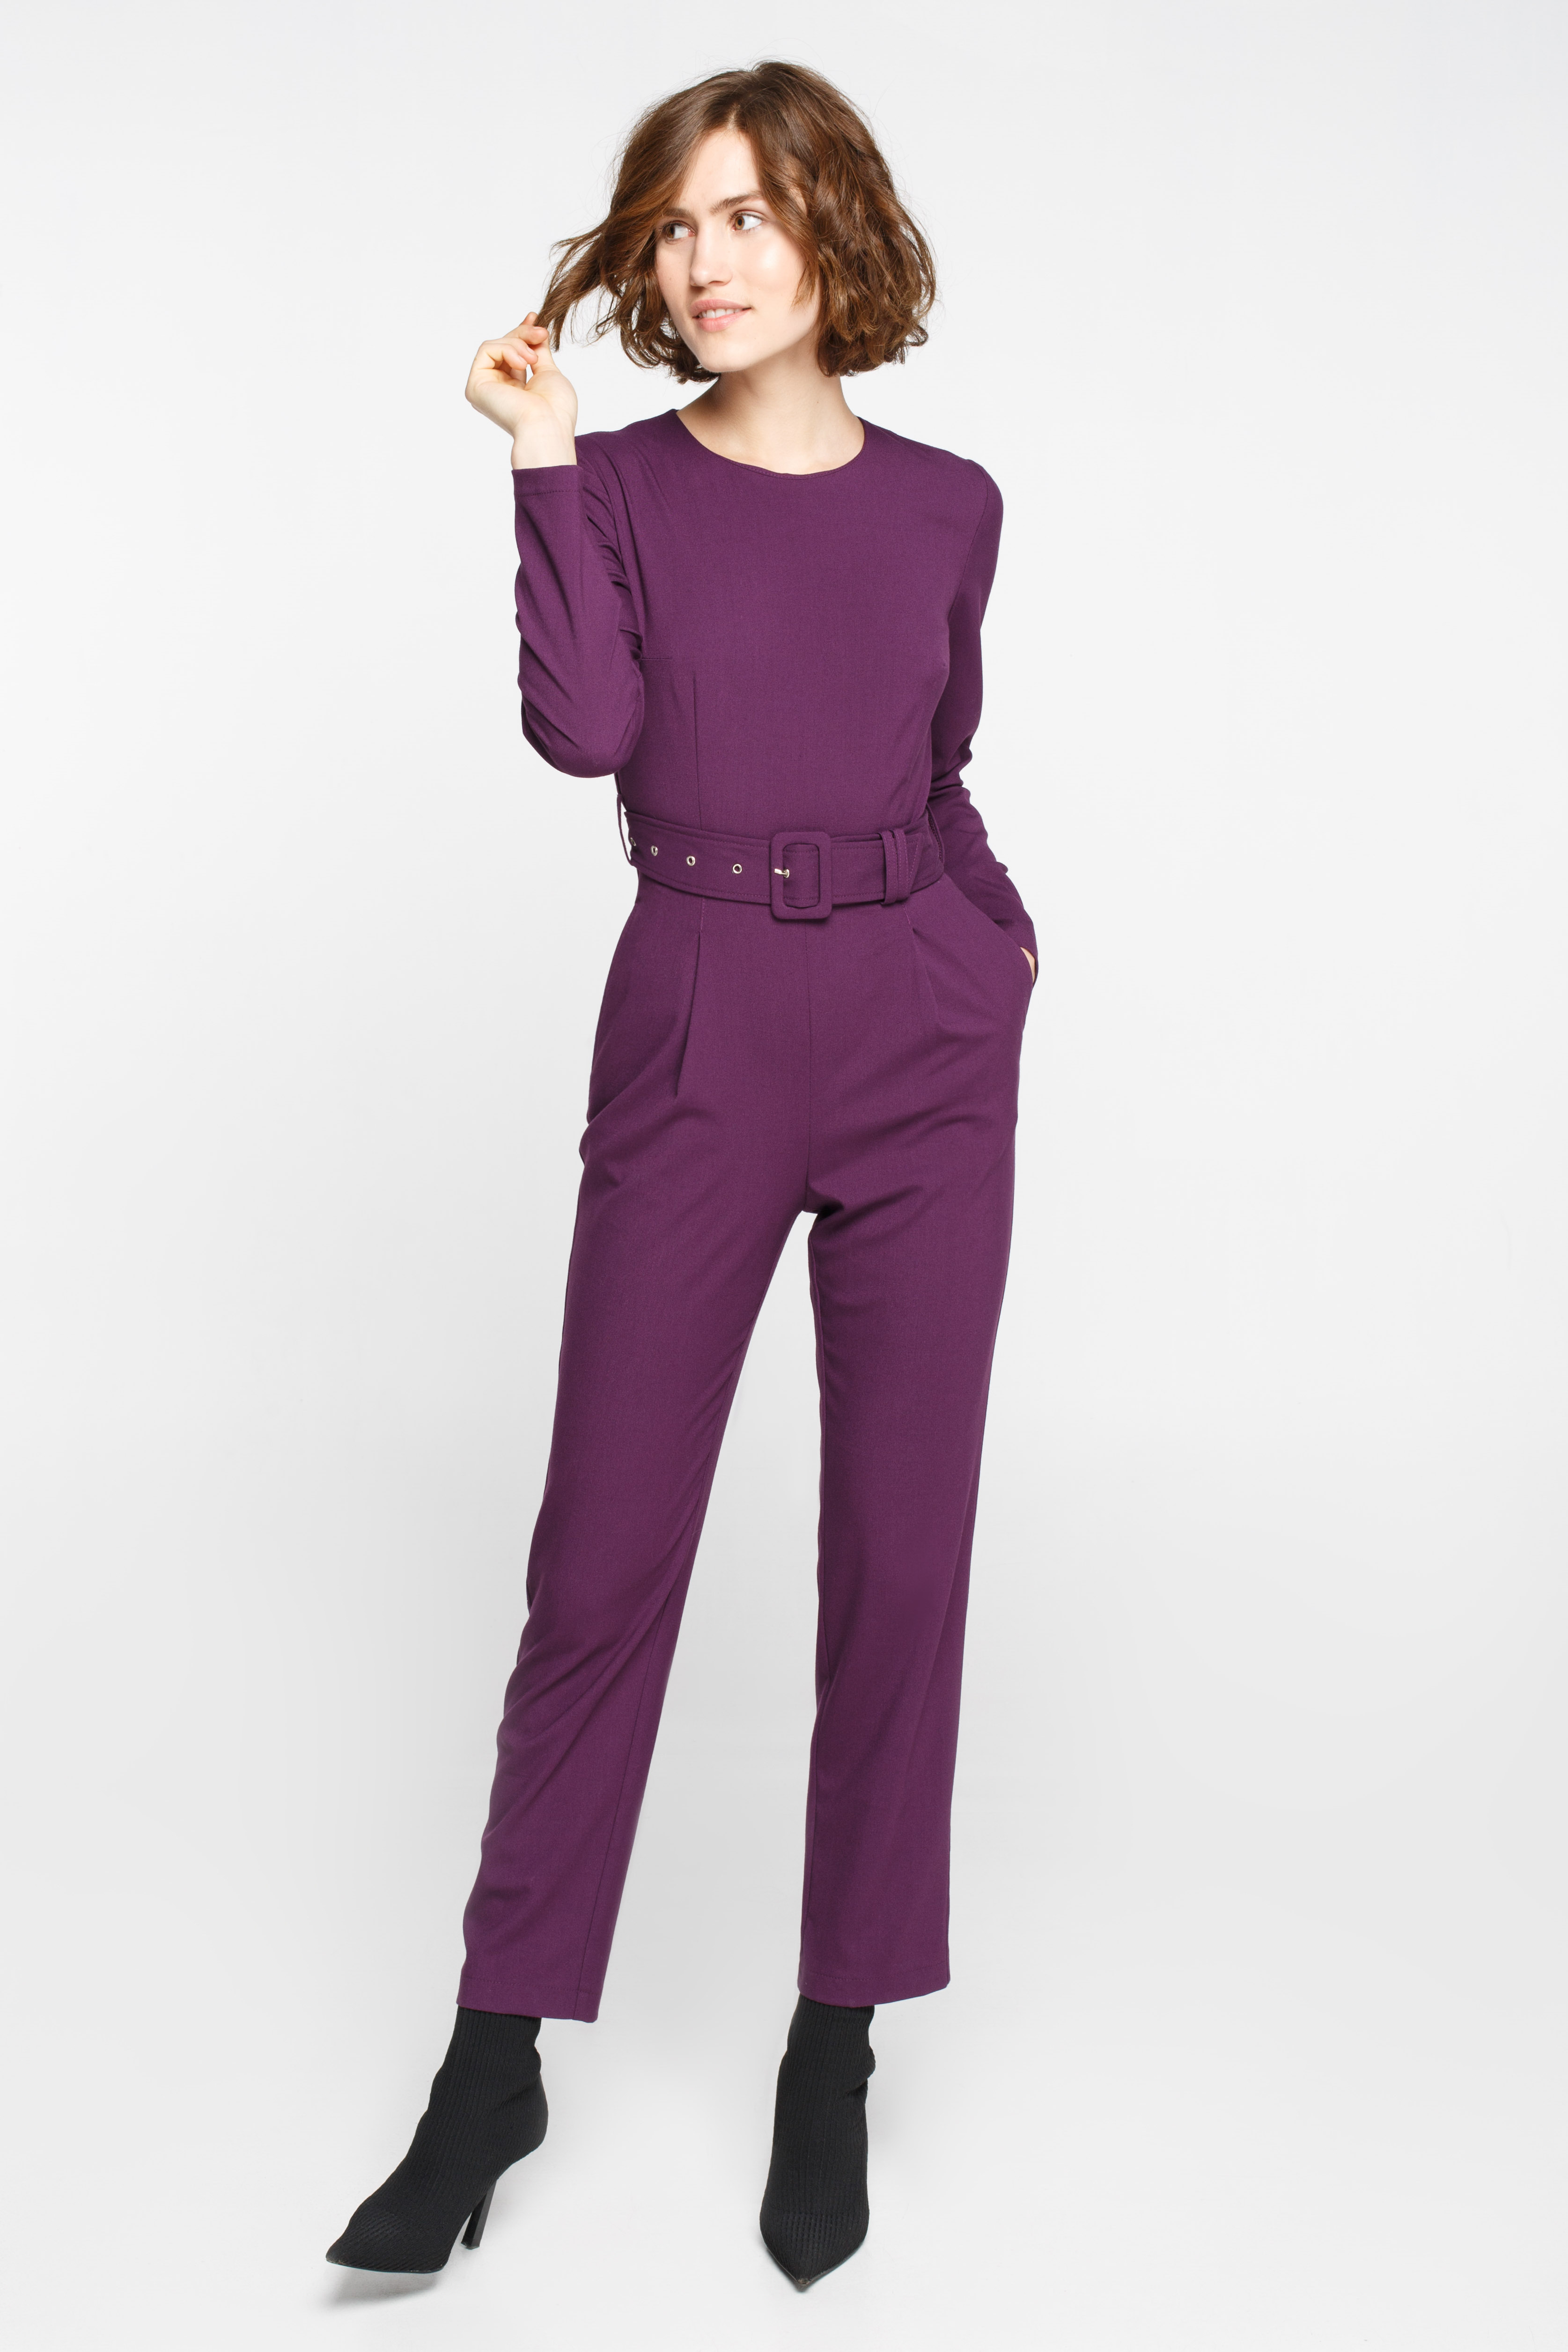 Purple jumpsuit with long sleeves and a belt, photo 1